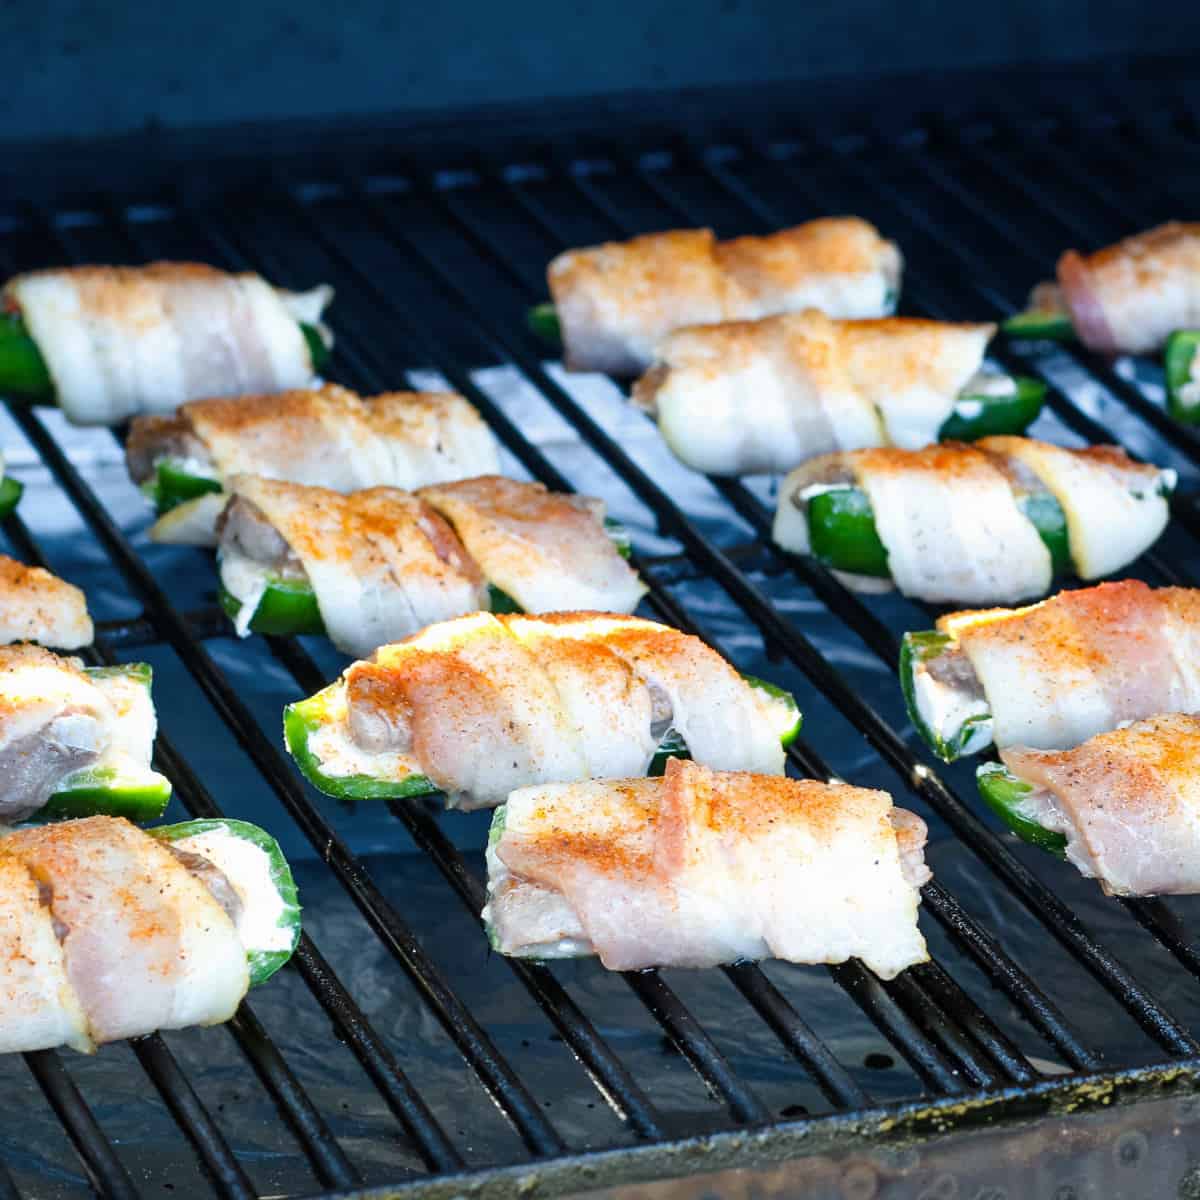 Venison jalapeno poppers smoking in a pellet grill.